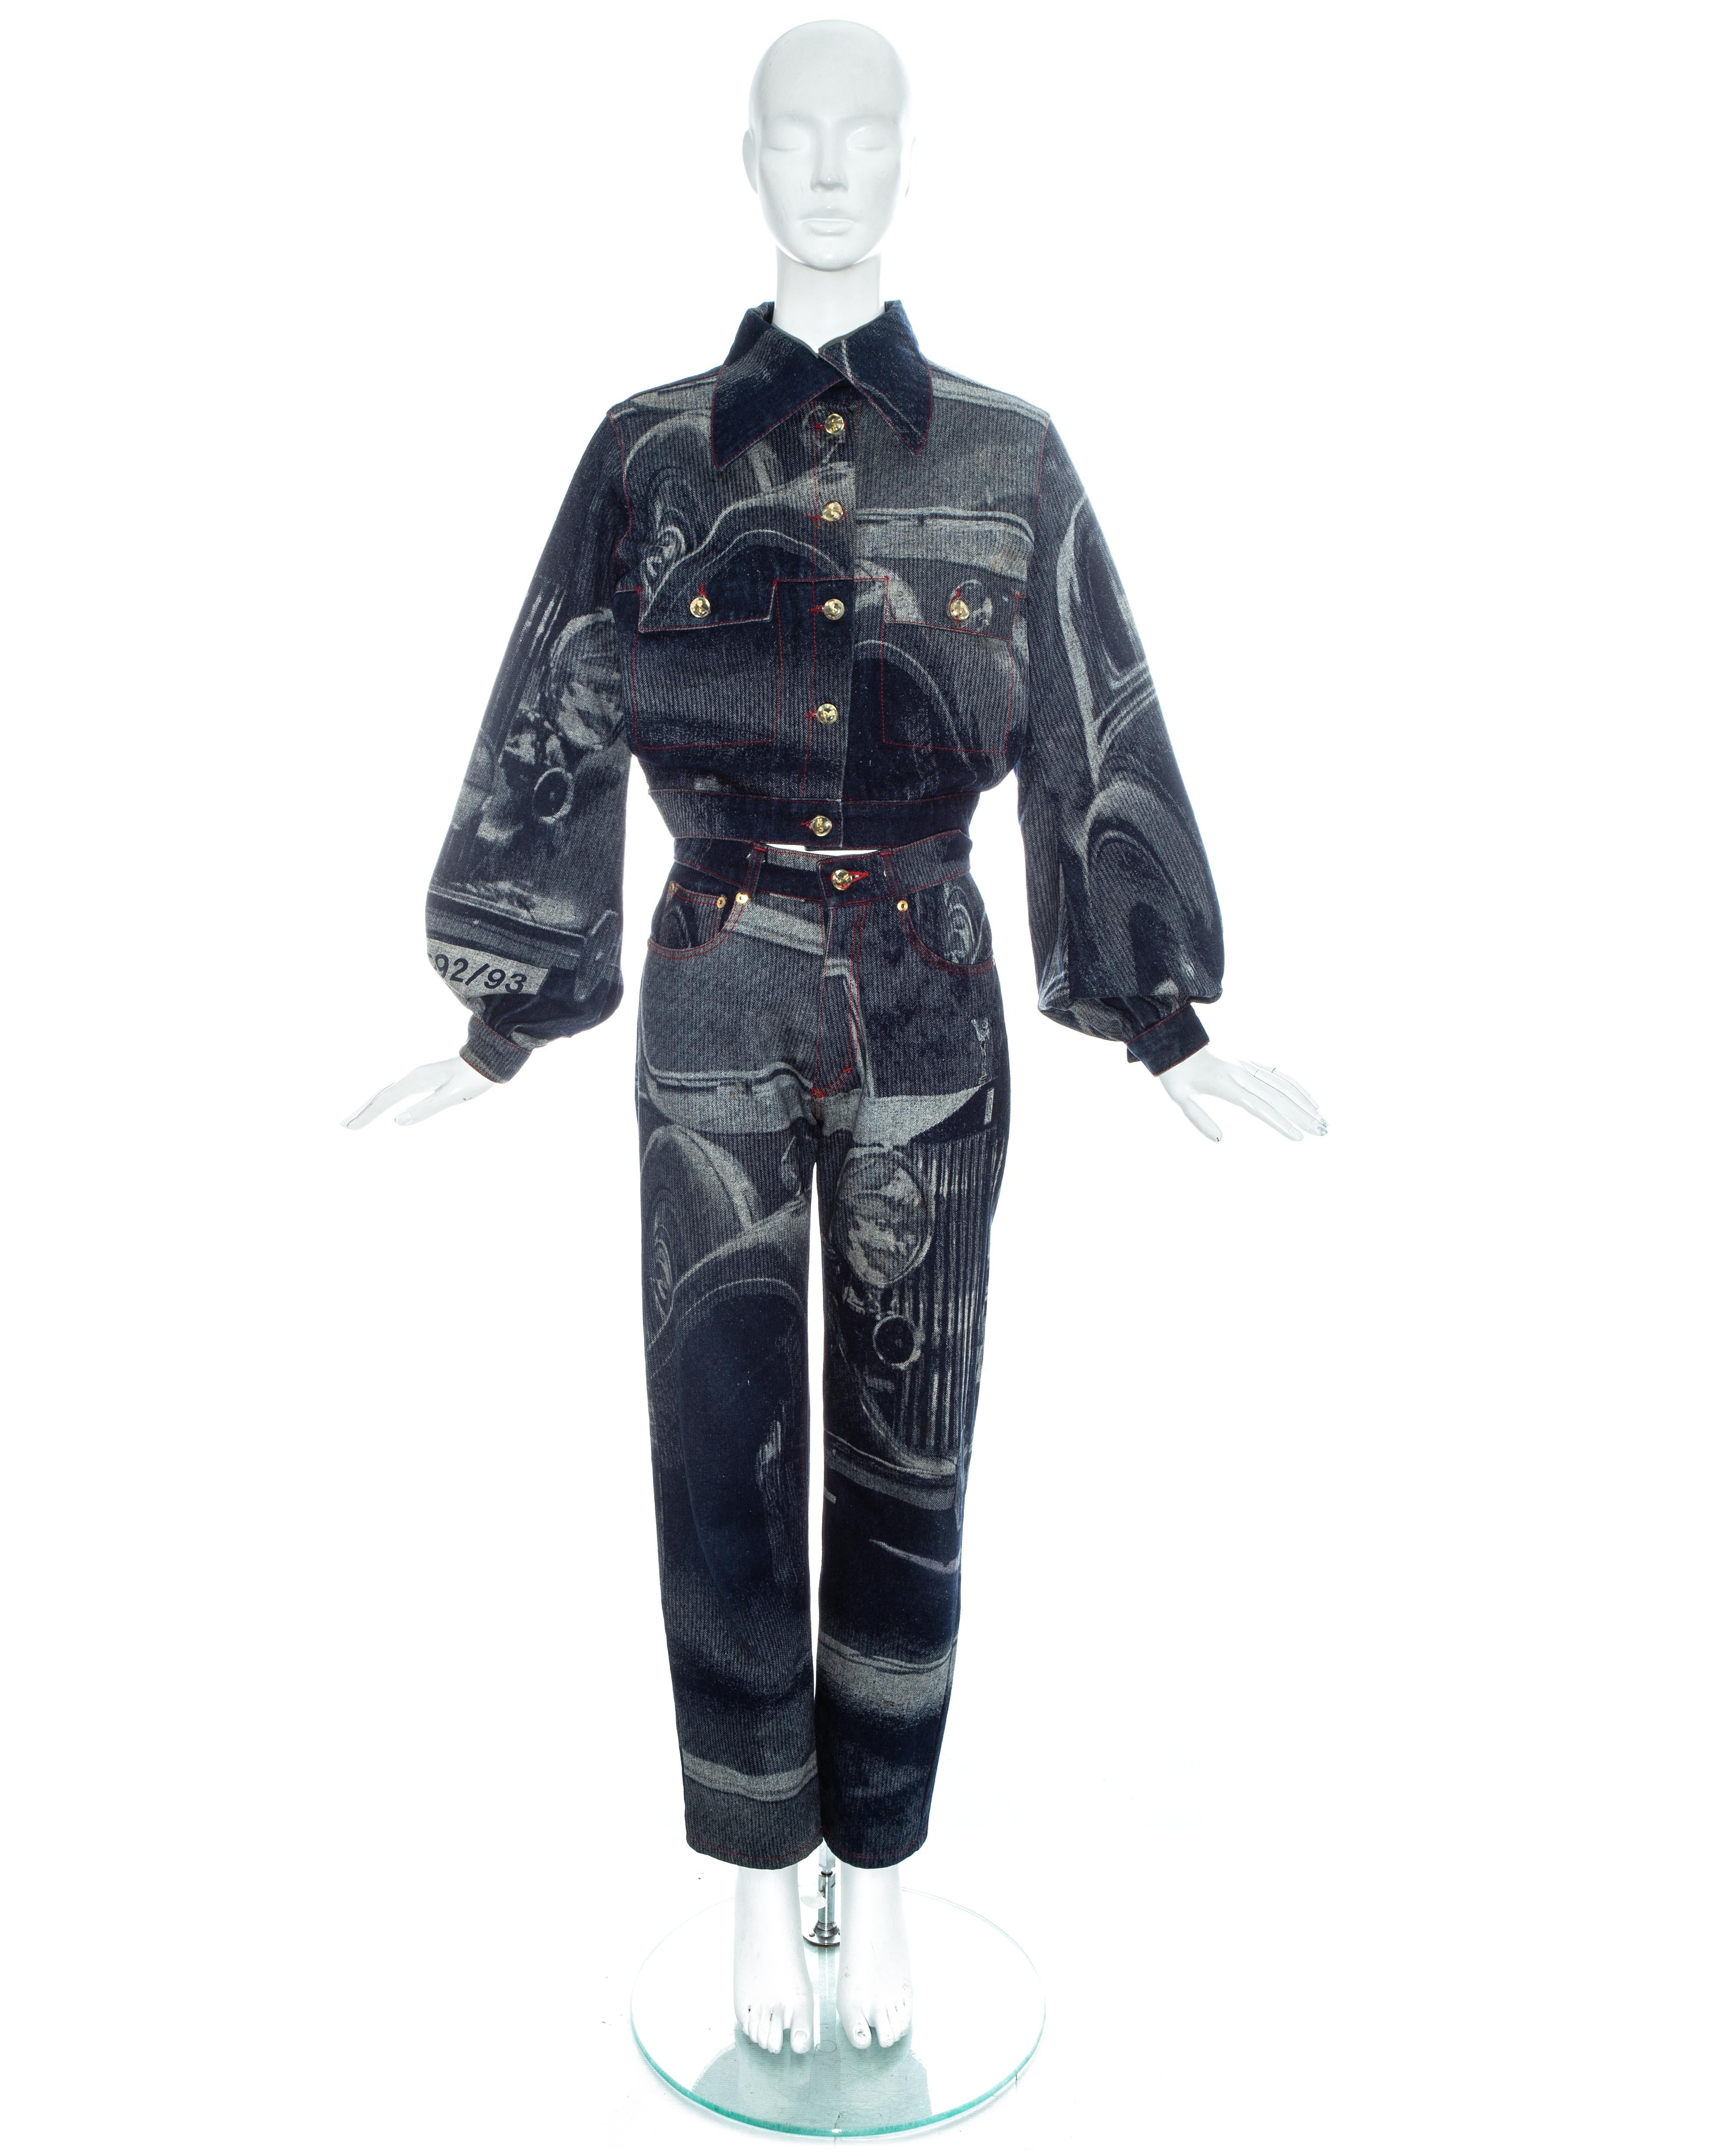 Vivienne Westwood Rolls Royce screen printed denim pant suit. High rise straight leg jeans and denim jacket with poet sleeves, clear orb buttons and adjustable waist closure.

Fall-Winter 1992